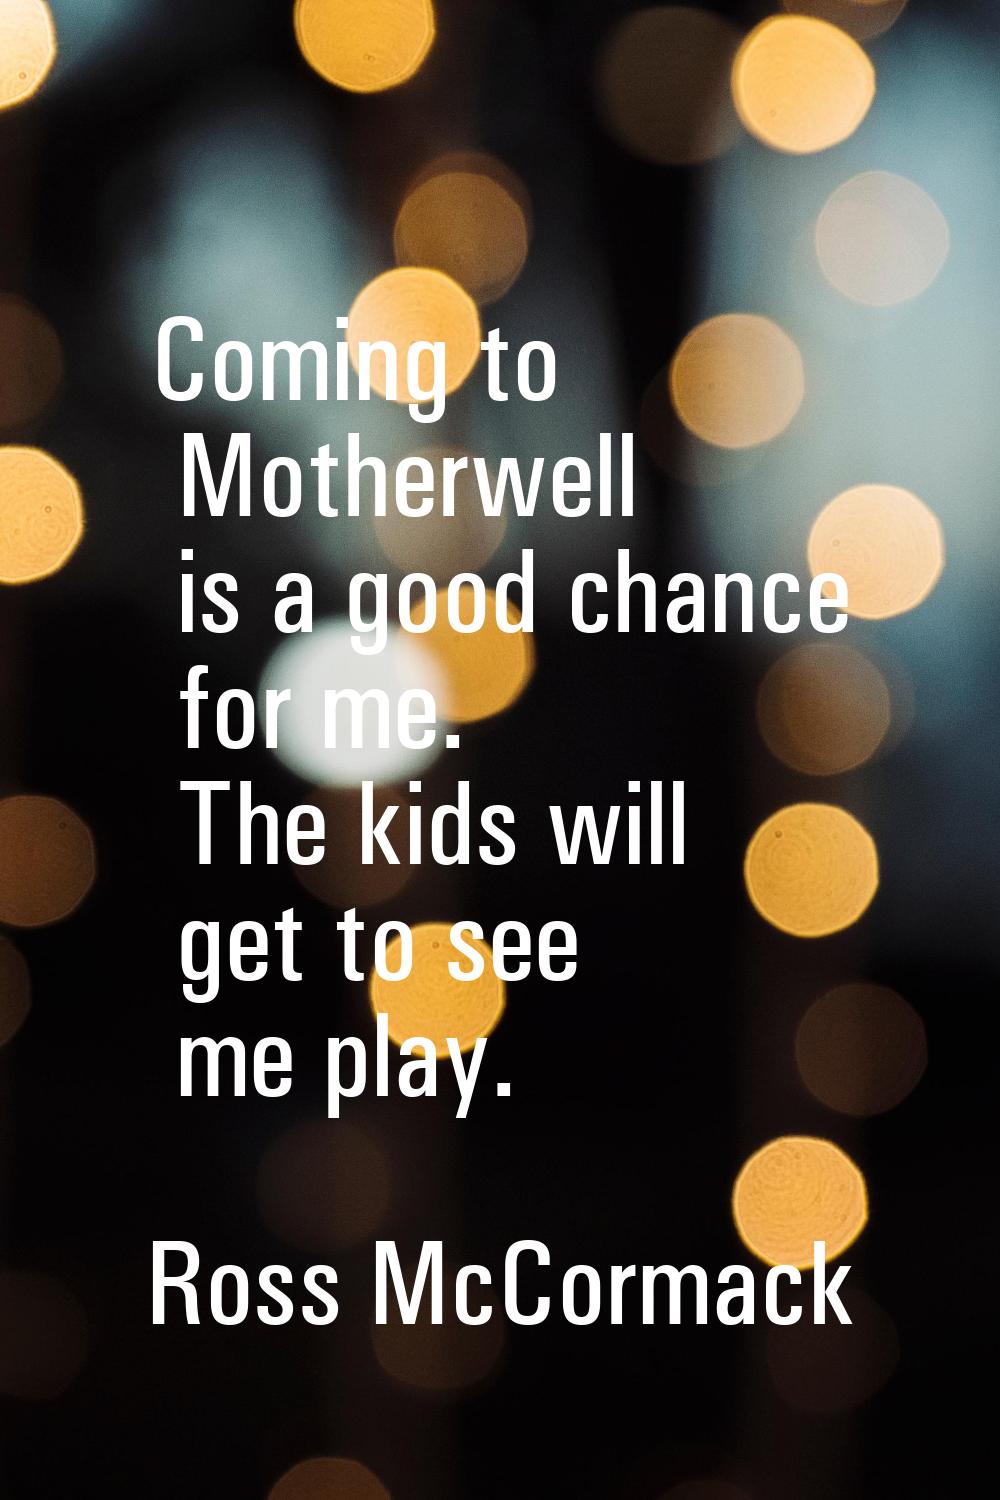 Coming to Motherwell is a good chance for me. The kids will get to see me play.